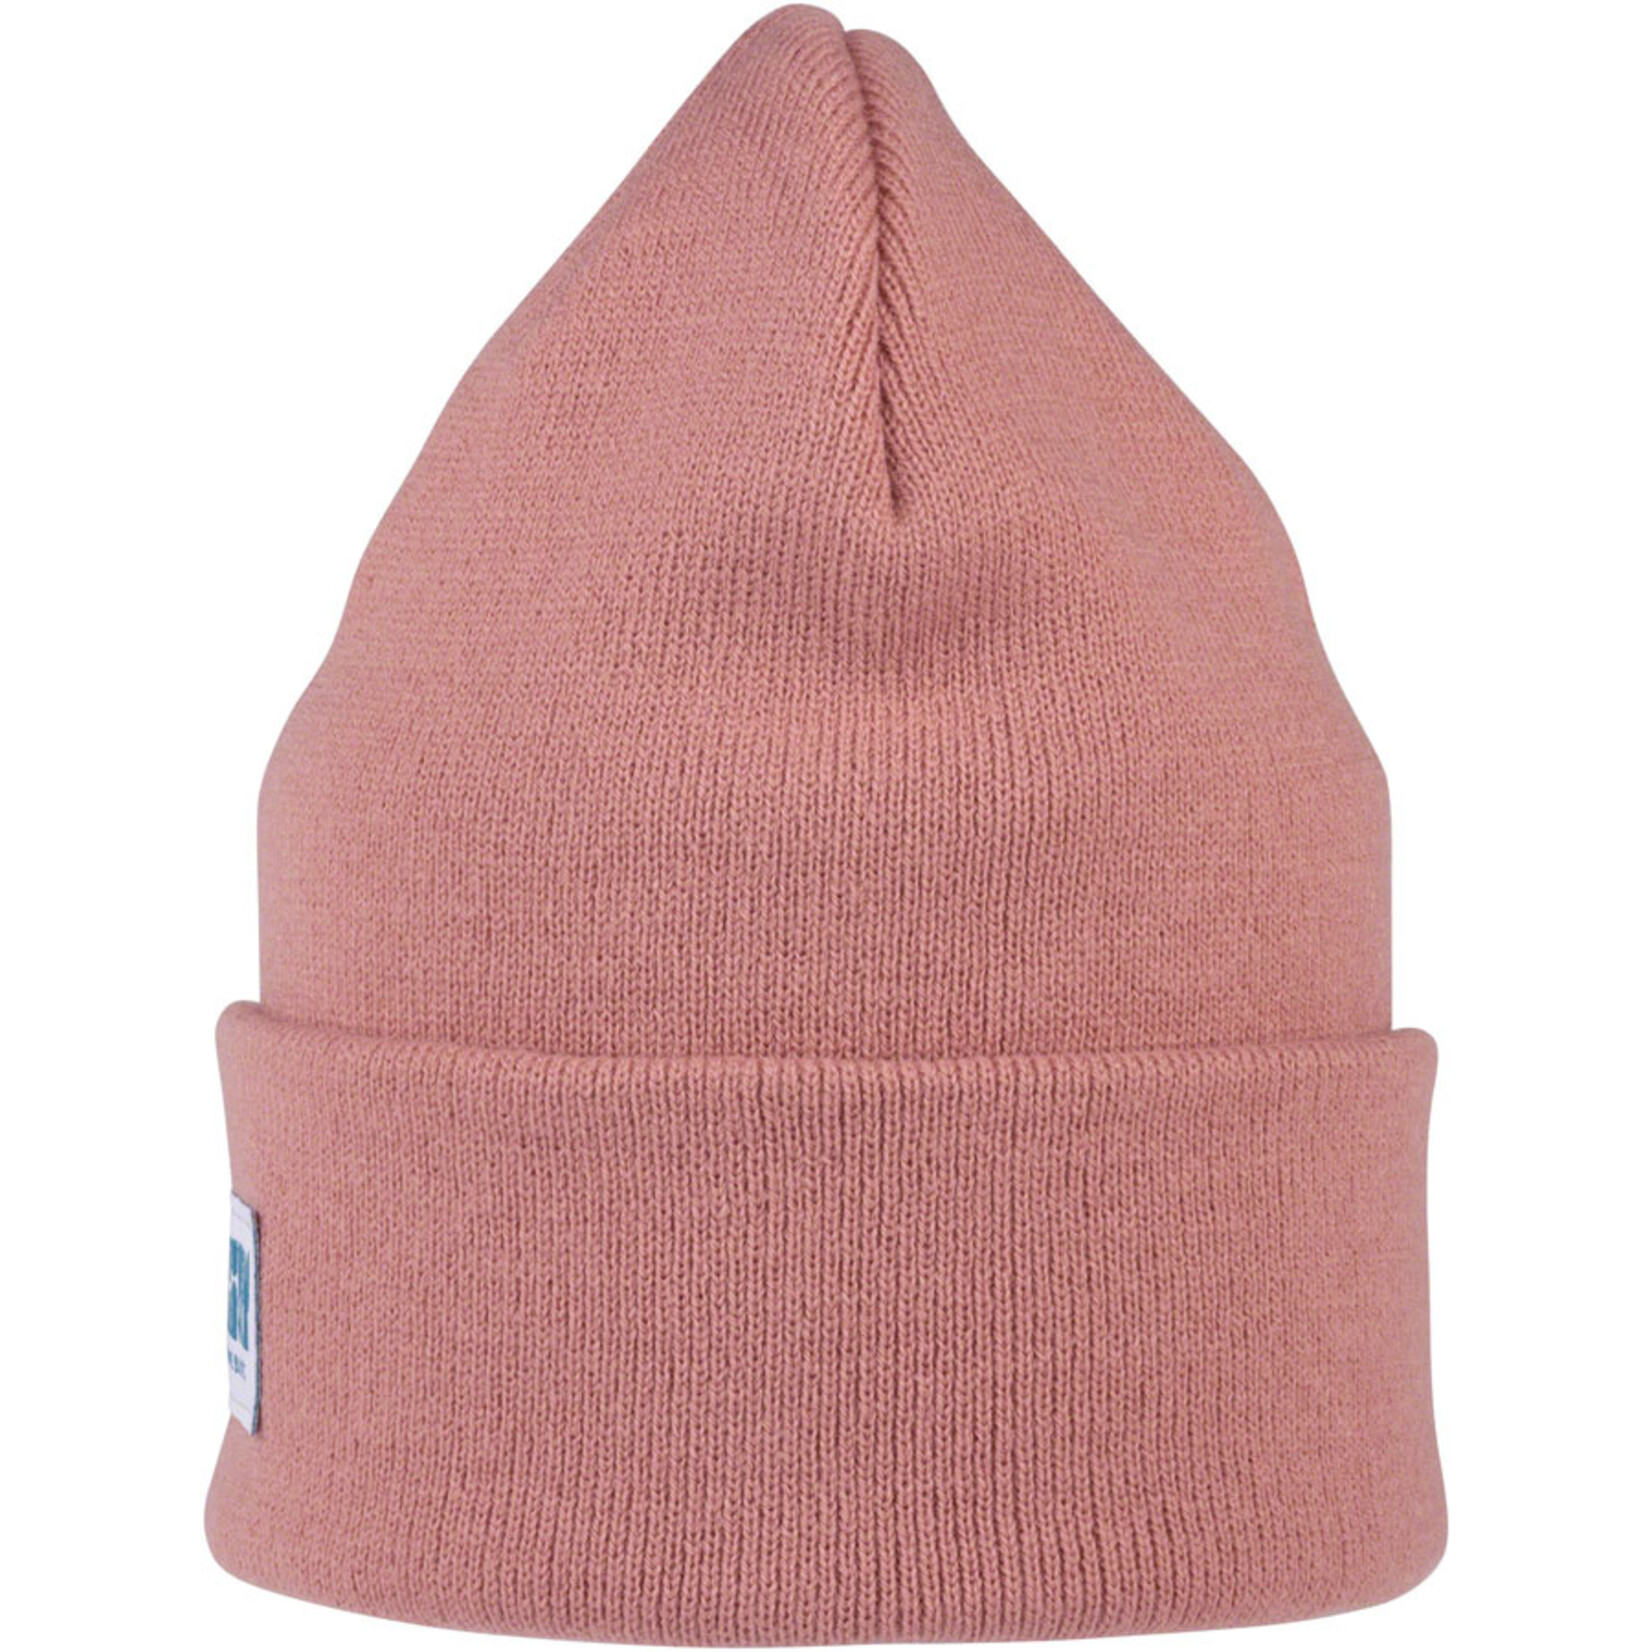 All-City All-City Week-Endo Beanie - Rose, One Size